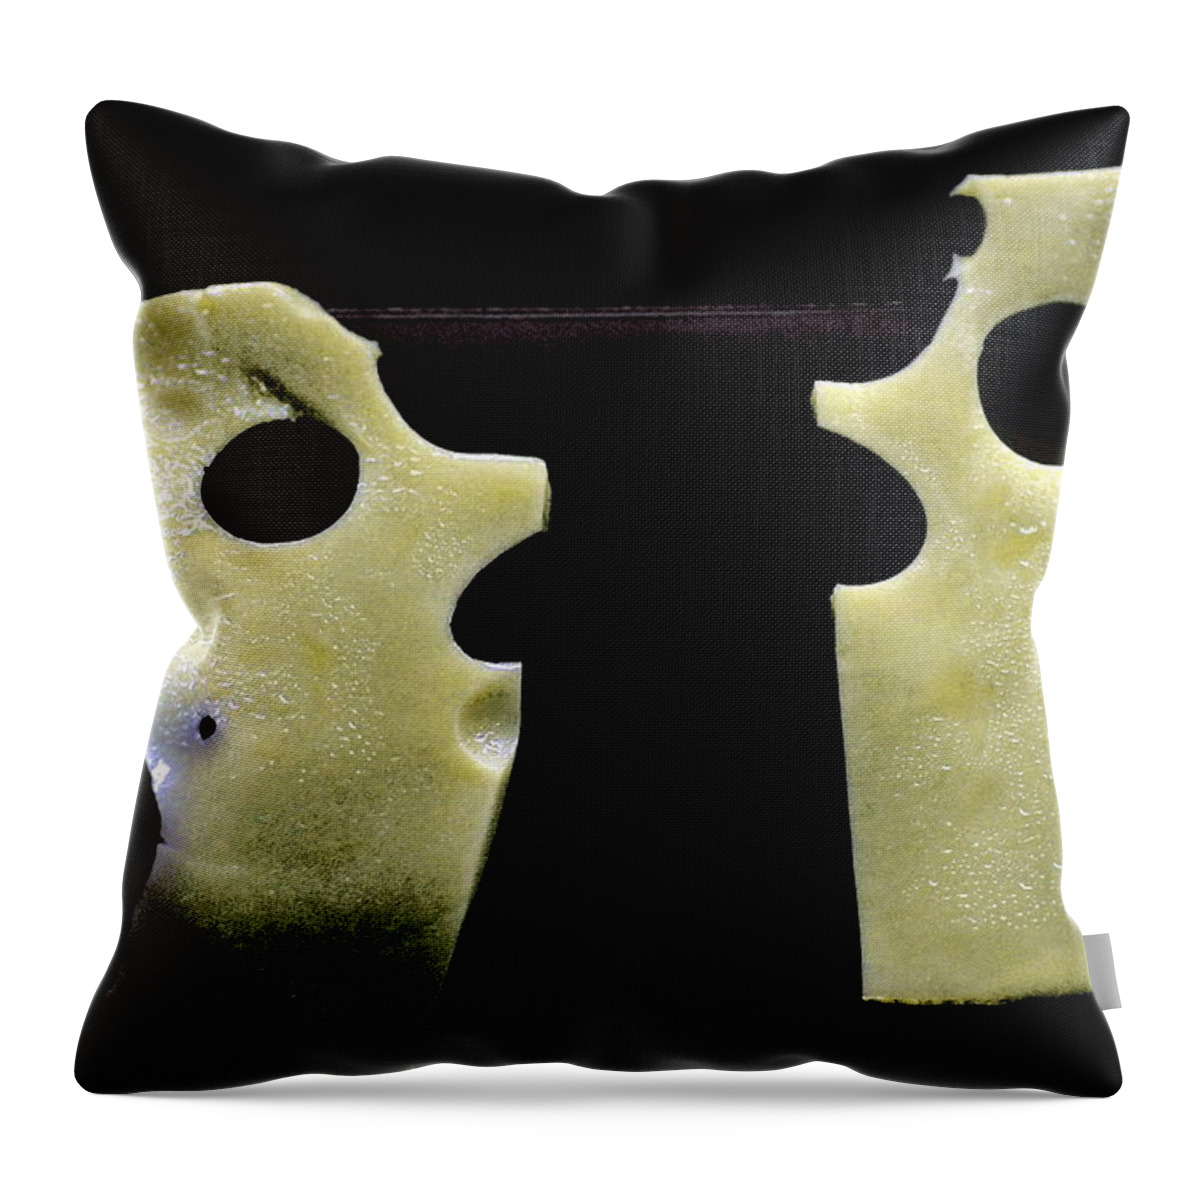 Living Room Throw Pillow featuring the photograph #0003 #0003 by Alexander Gerasimov